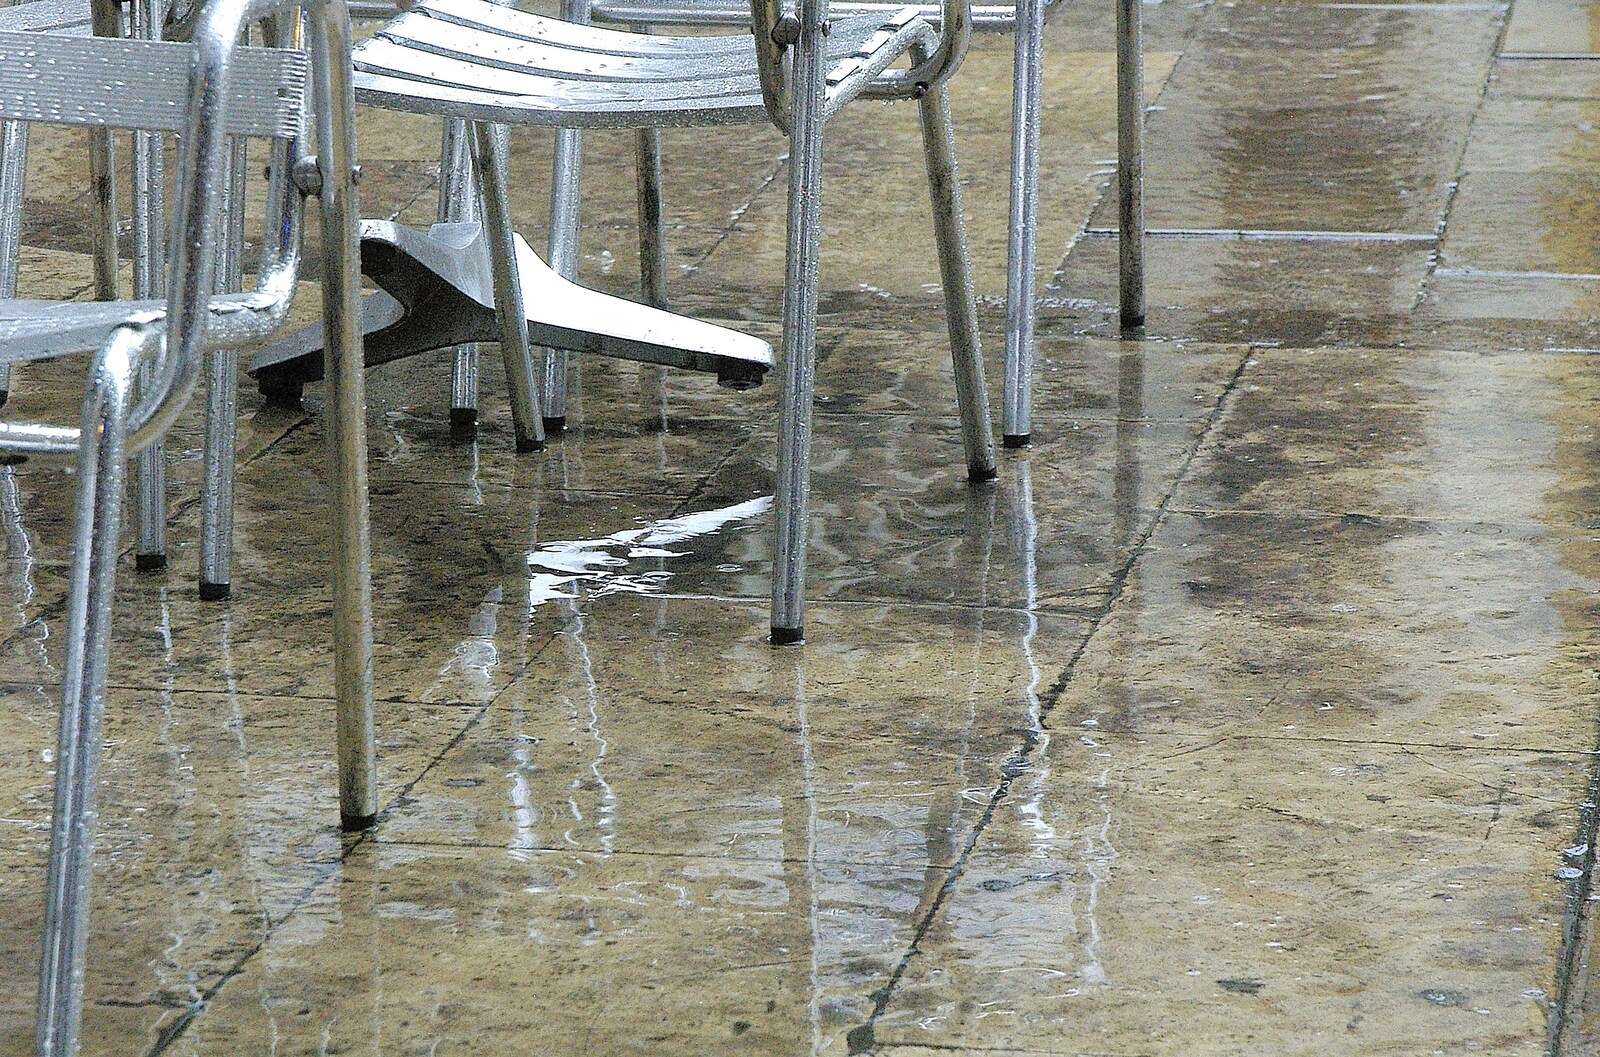 Wet flagstones and the reflection of chairs from Two Days in Barcelona, Catalunya, Spain - 22nd September 2006